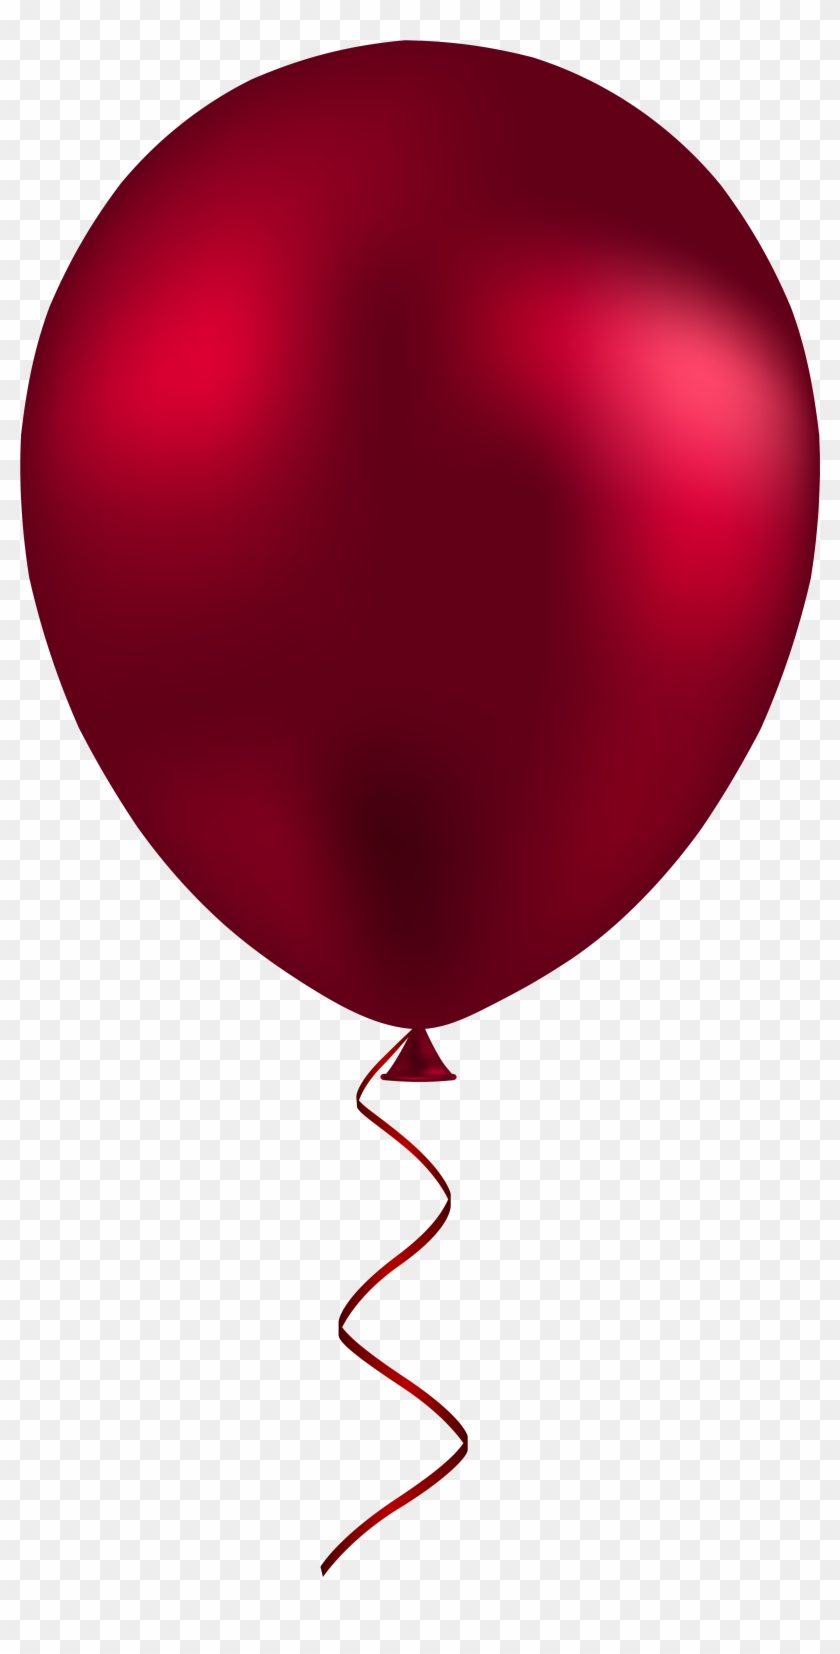 Red Balloon Png Clip Art - Balloon Png #19932